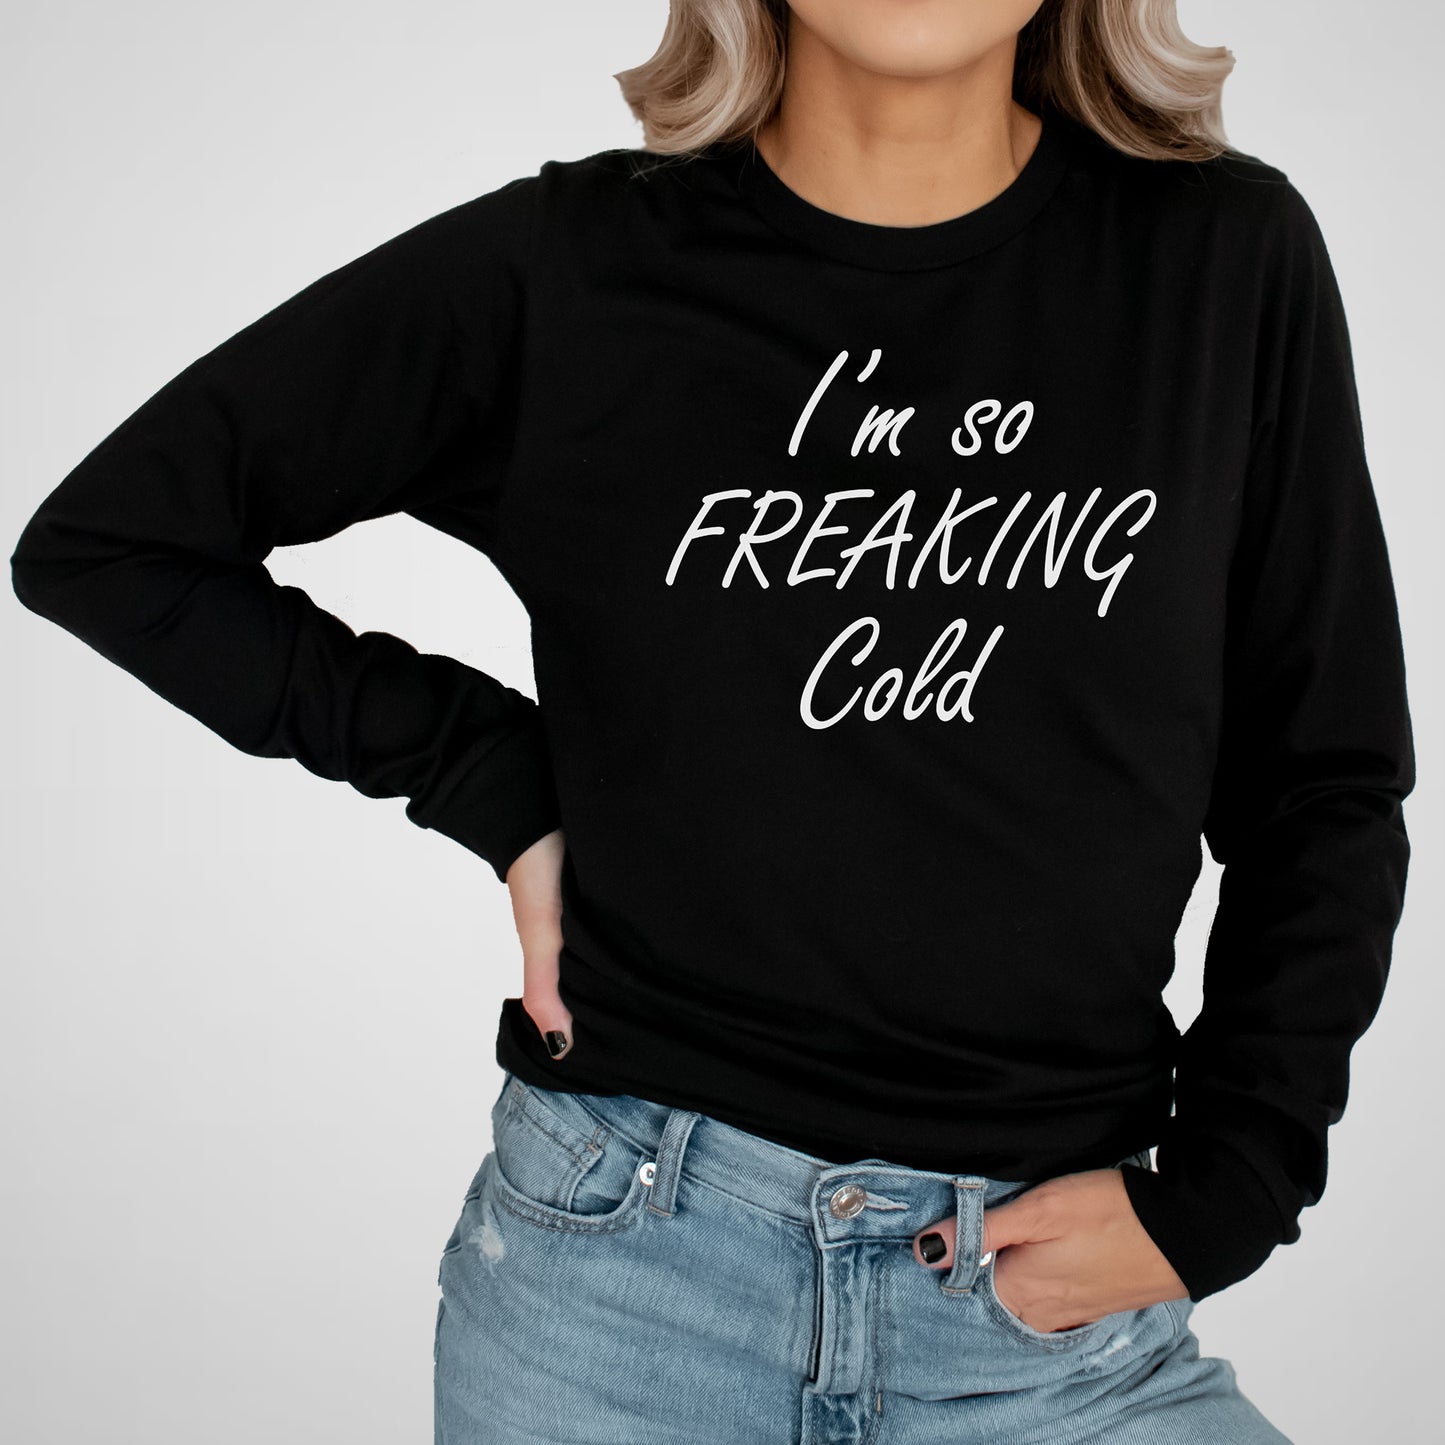 I'm So Freaking Cold - Adult Unisex Long Sleeve Tee